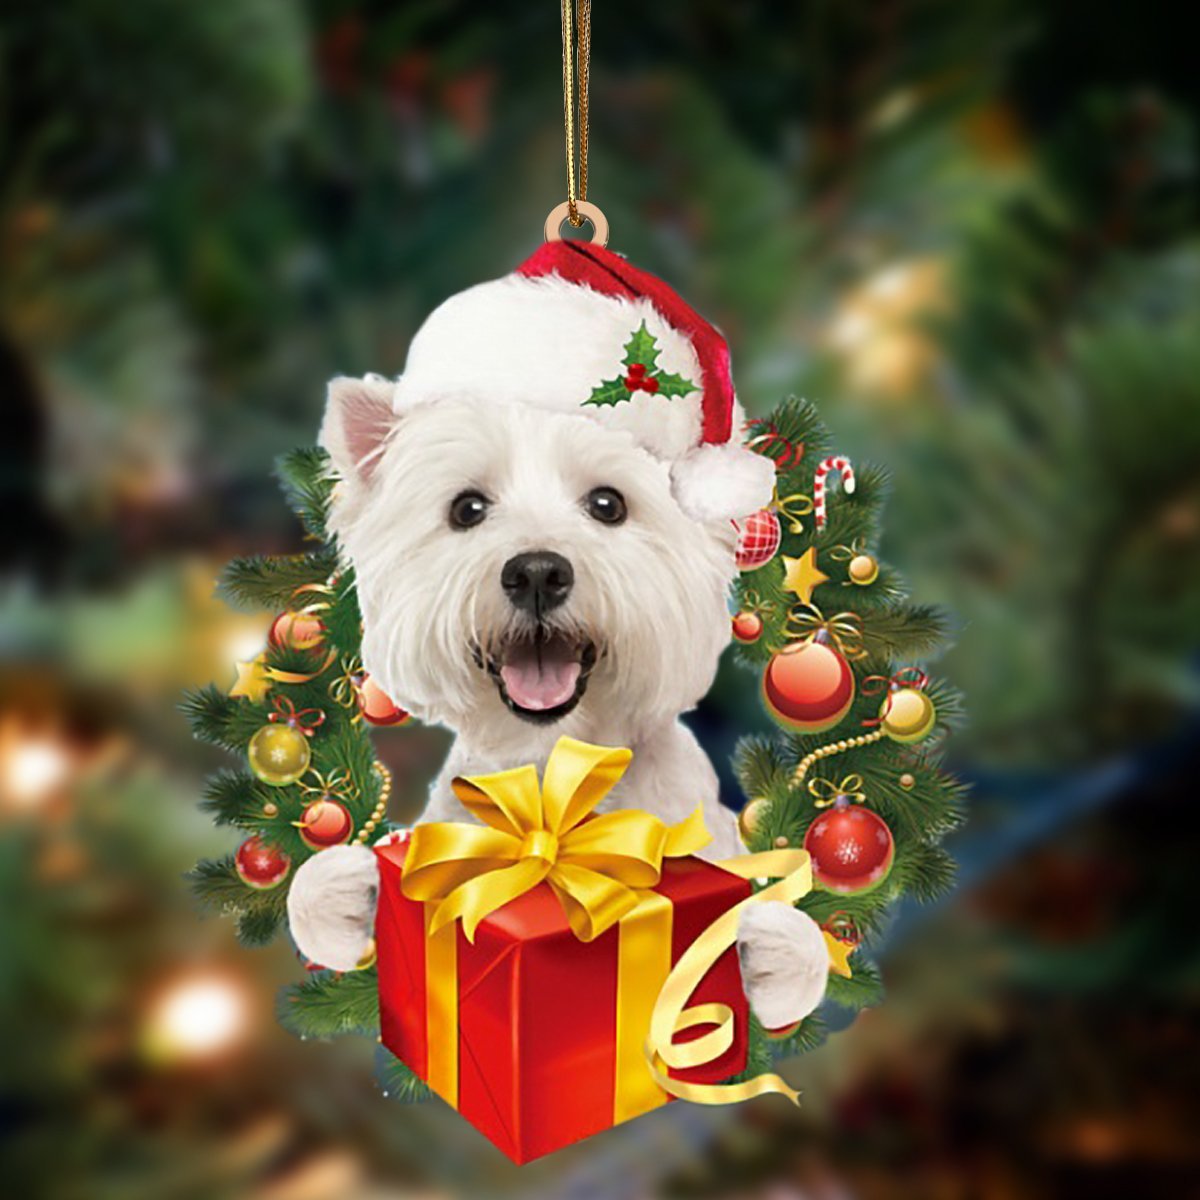 West Highland White Terrier Give Gifts Hanging Ornament - Flat Acrylic Dog Ornament – Dog Lovers Gifts For Him Or Her